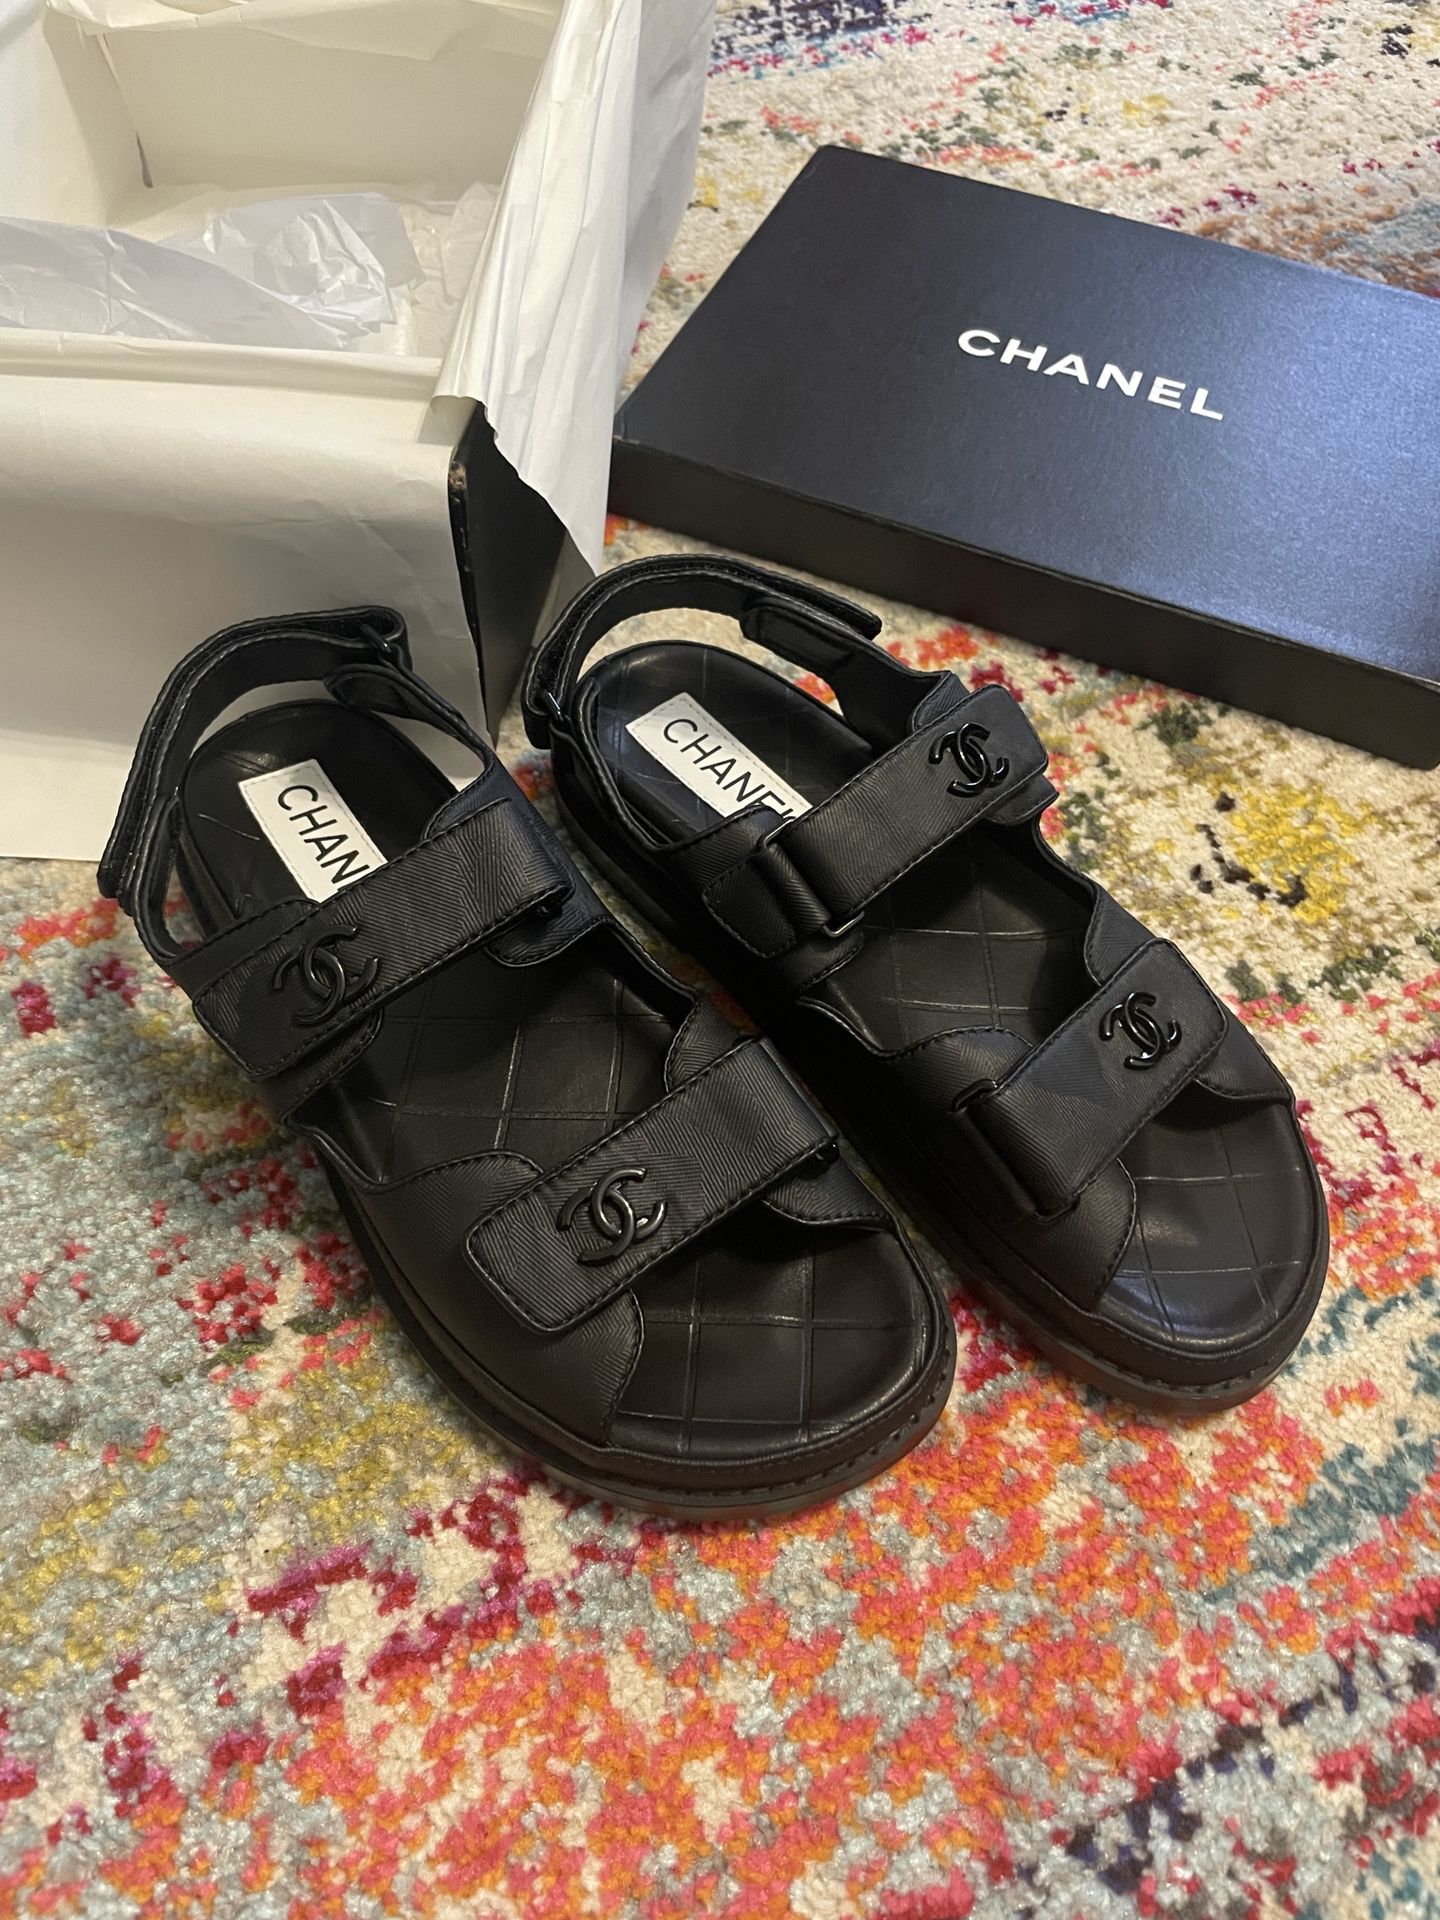 Chanel sandals brand new in box